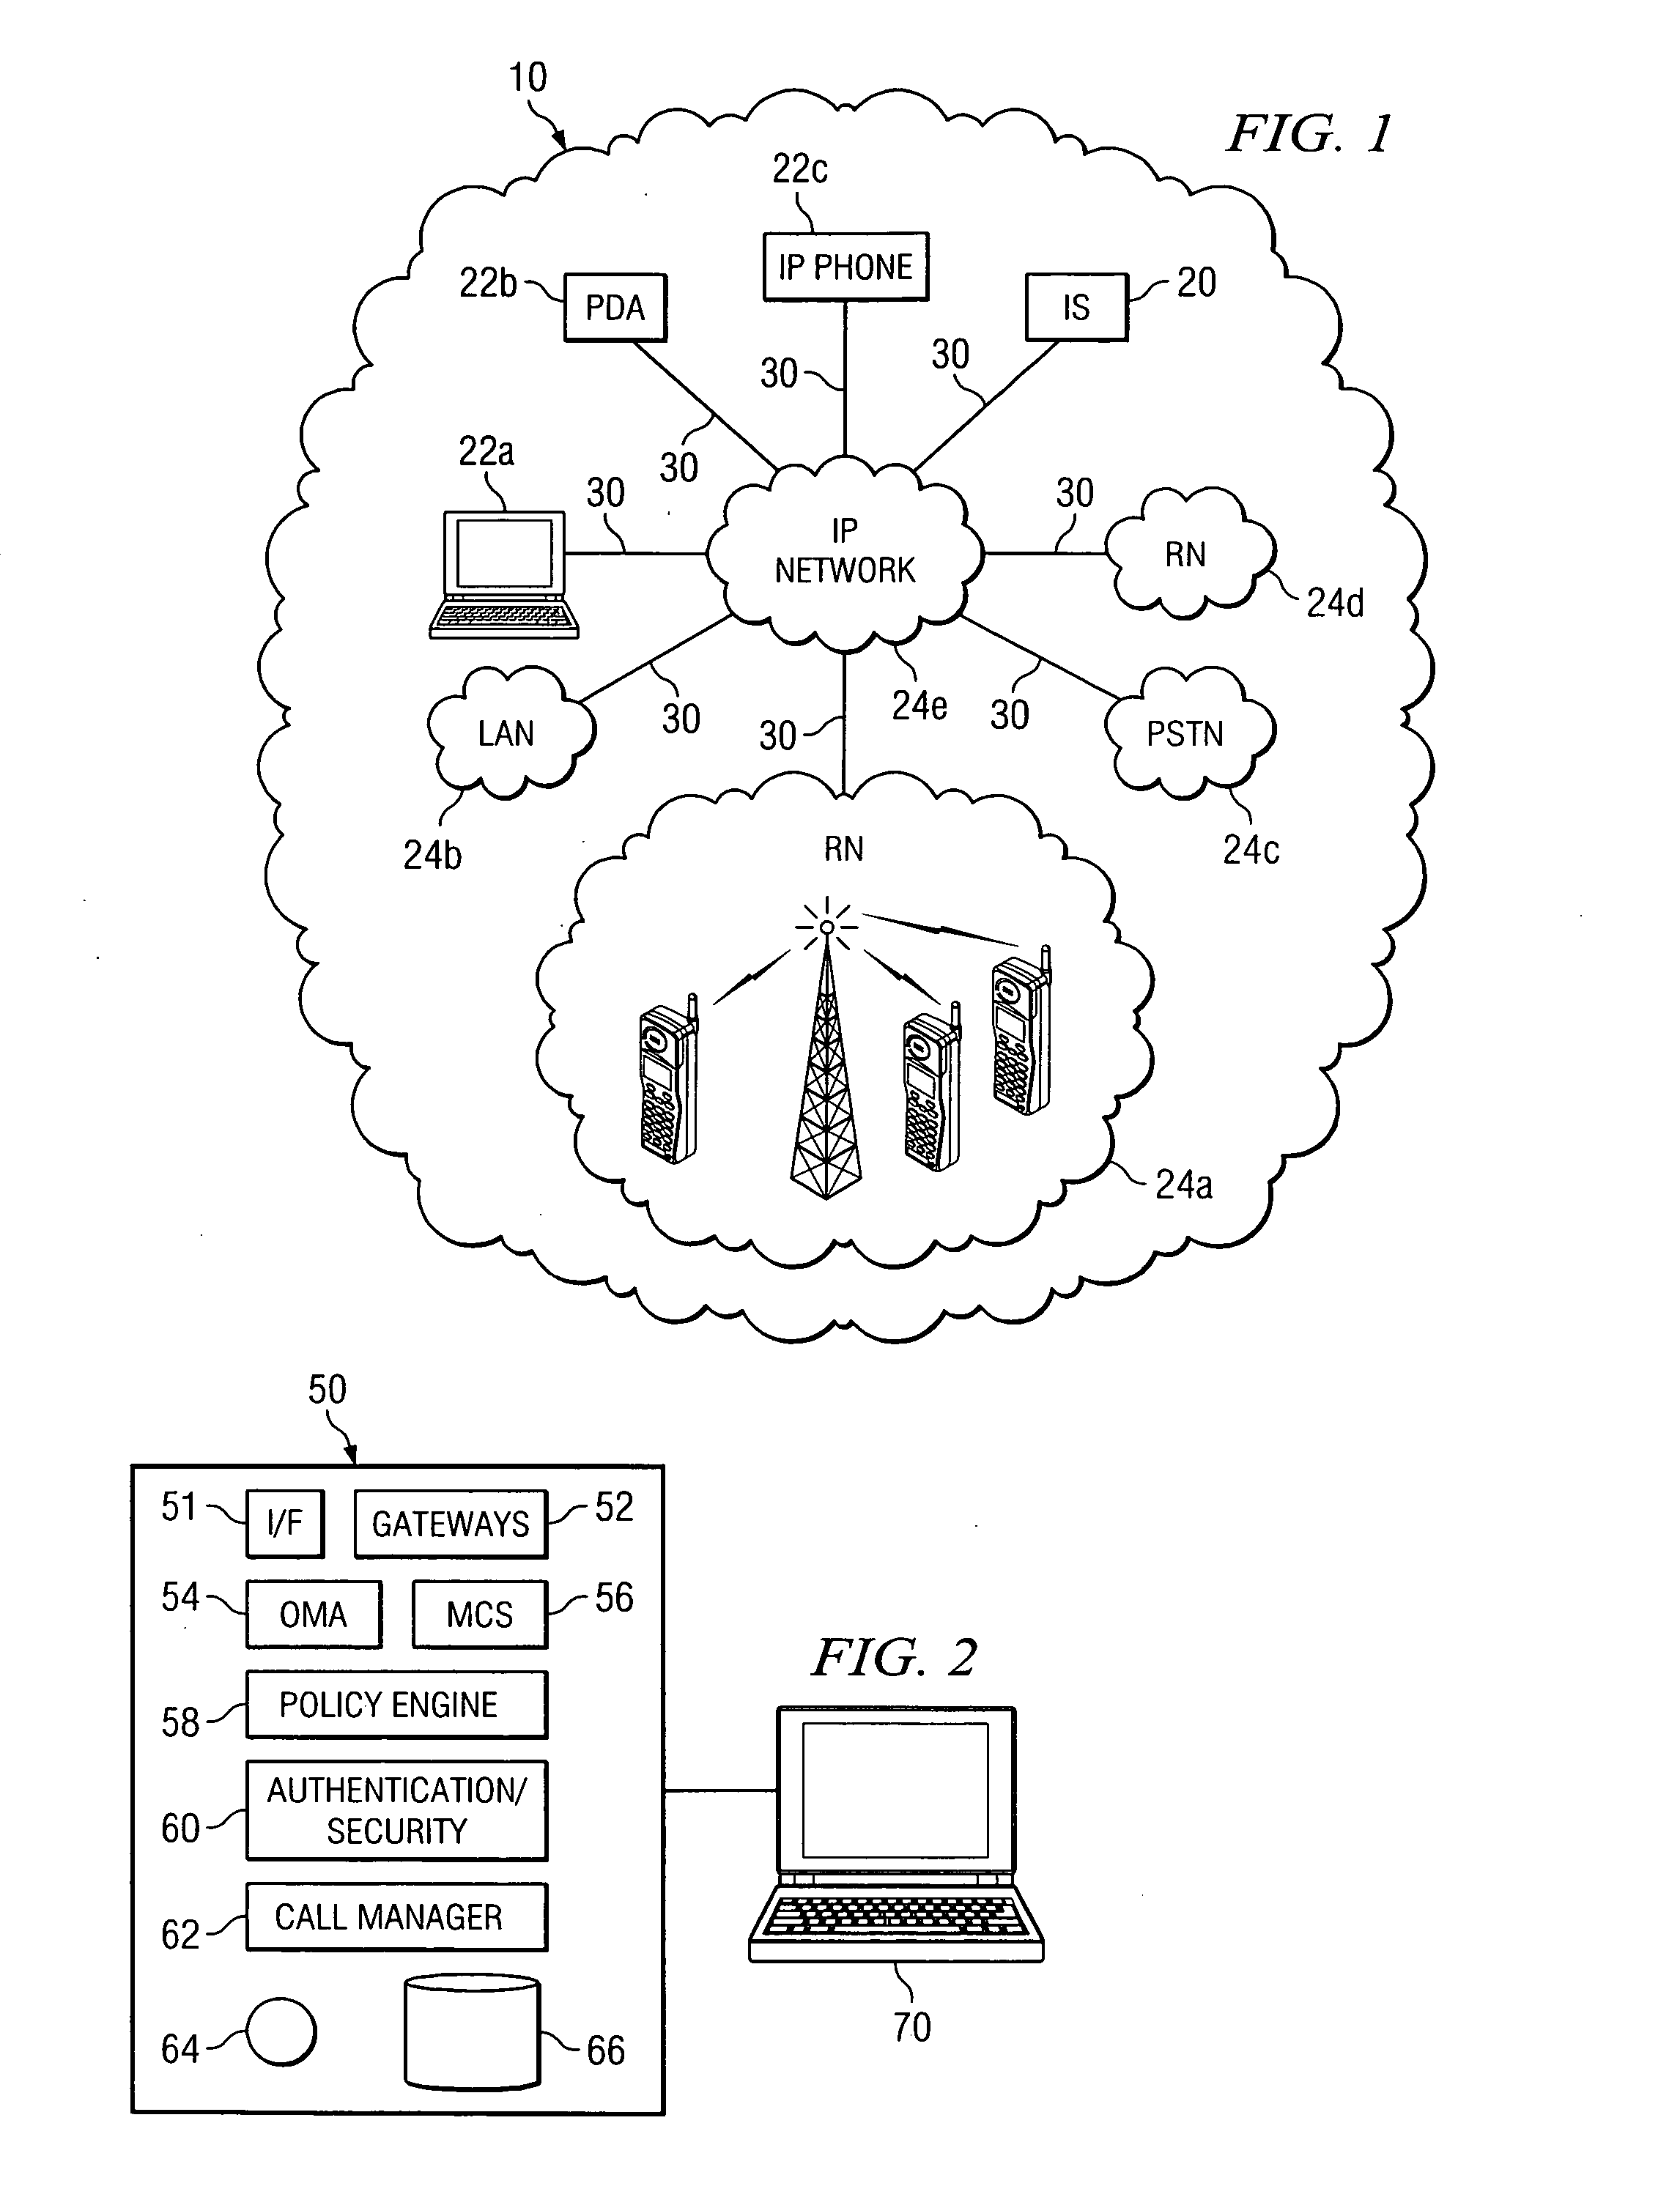 Method and system for providing a proxy media service